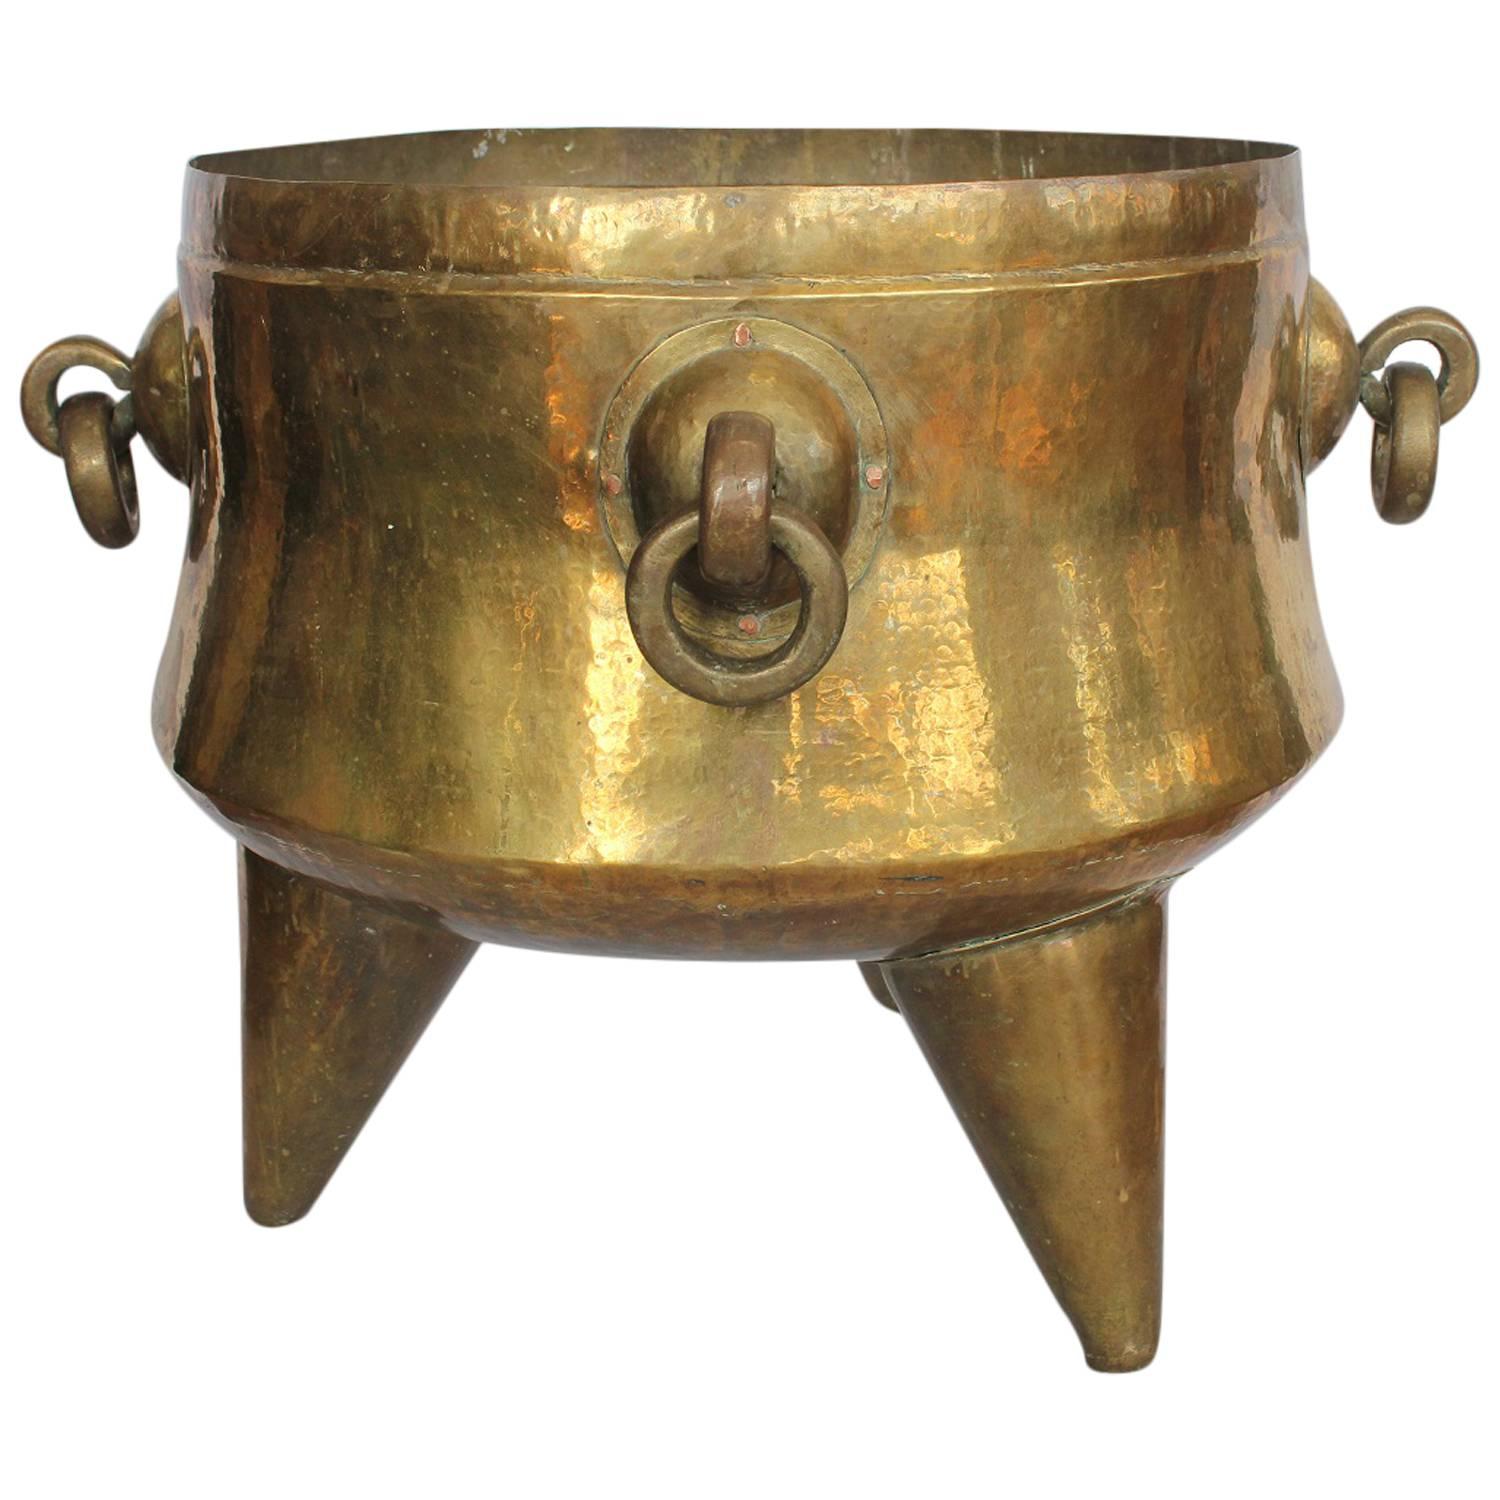 Giant Antique Decorative Brass Footed Cauldron With Handles For Sale